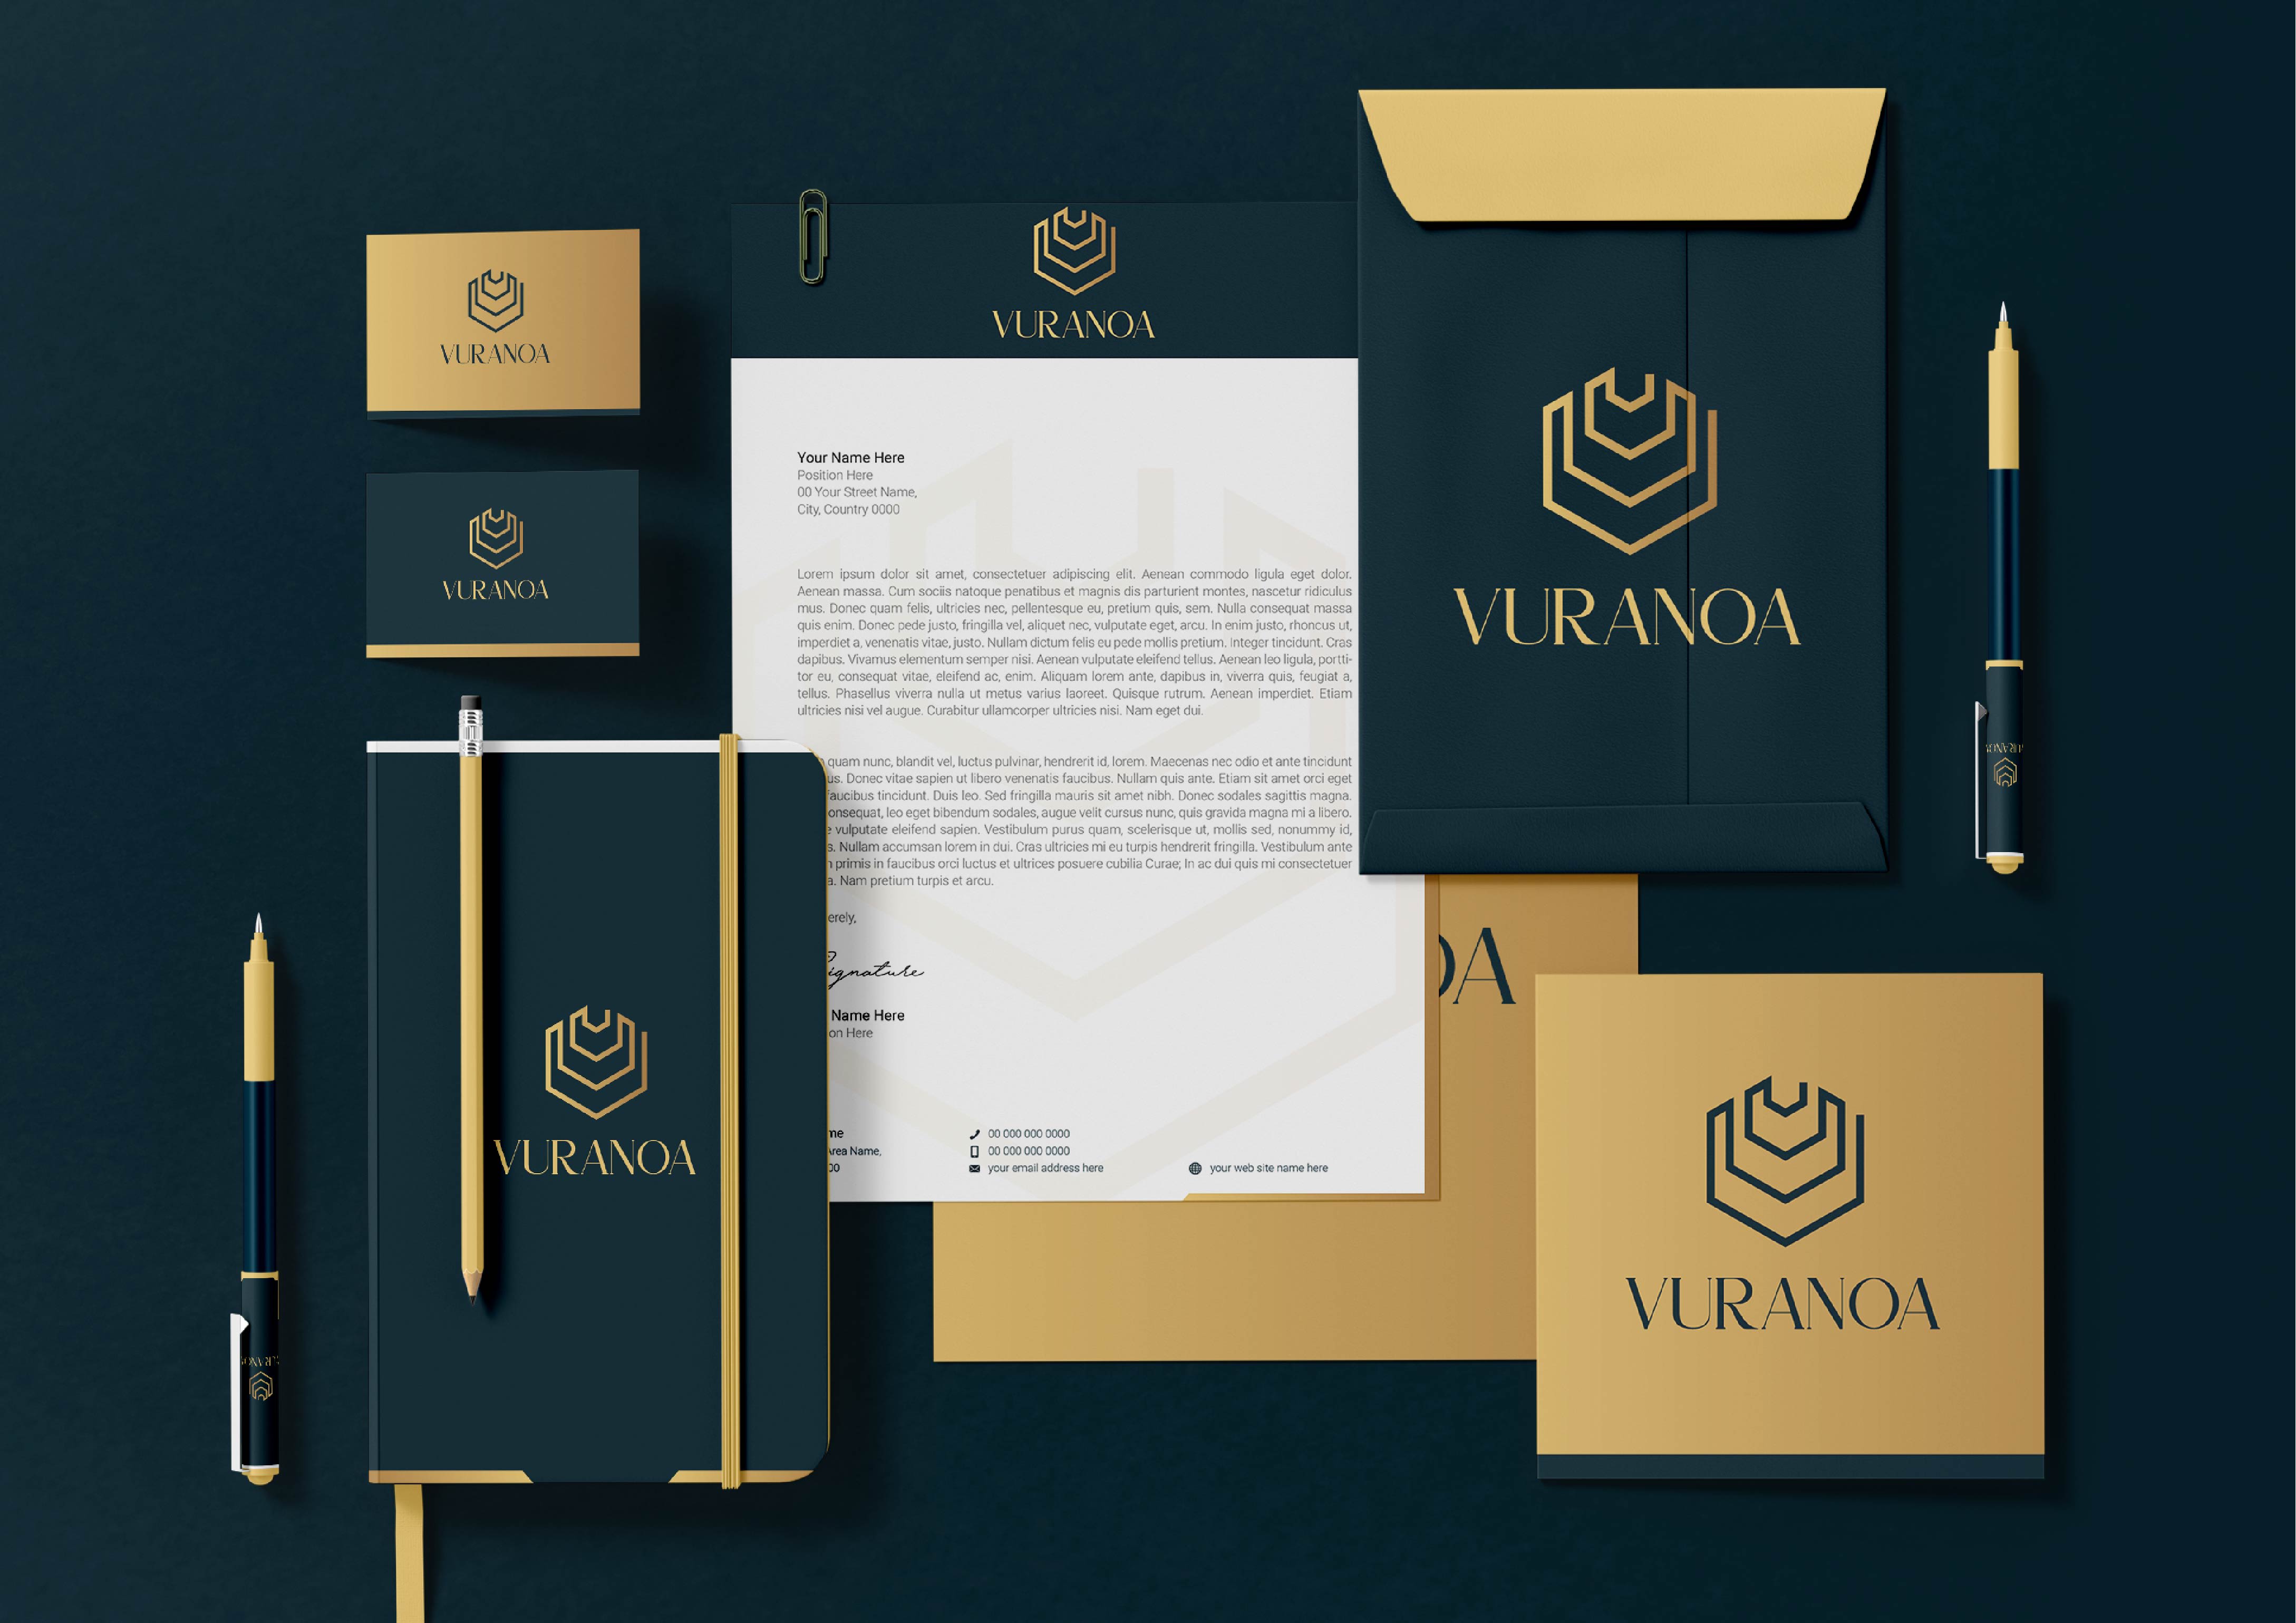 Do flat luxury and elegant logo for your business by Syedali554